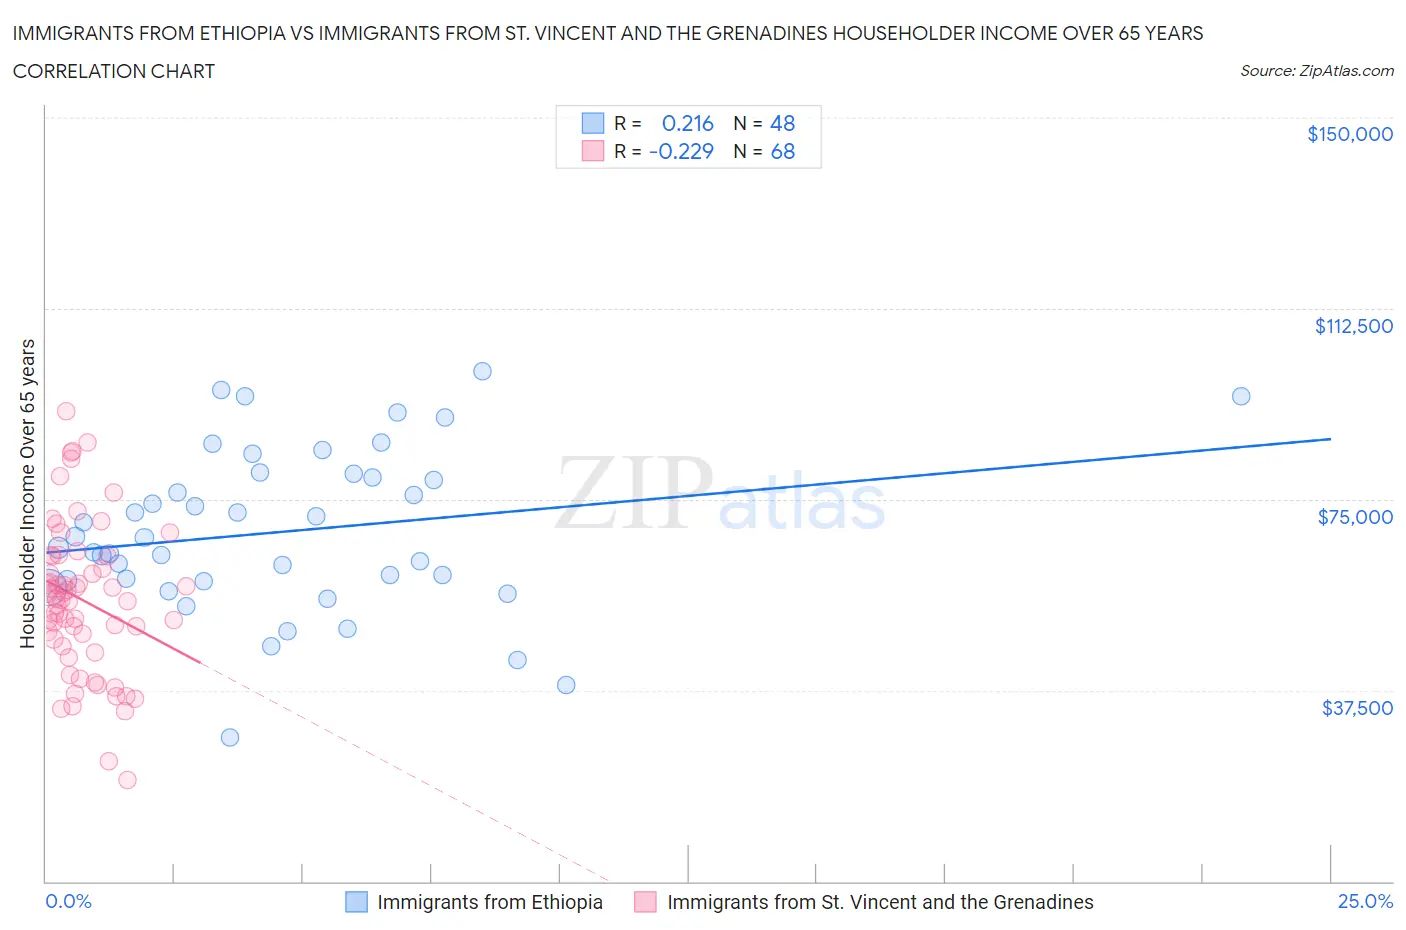 Immigrants from Ethiopia vs Immigrants from St. Vincent and the Grenadines Householder Income Over 65 years